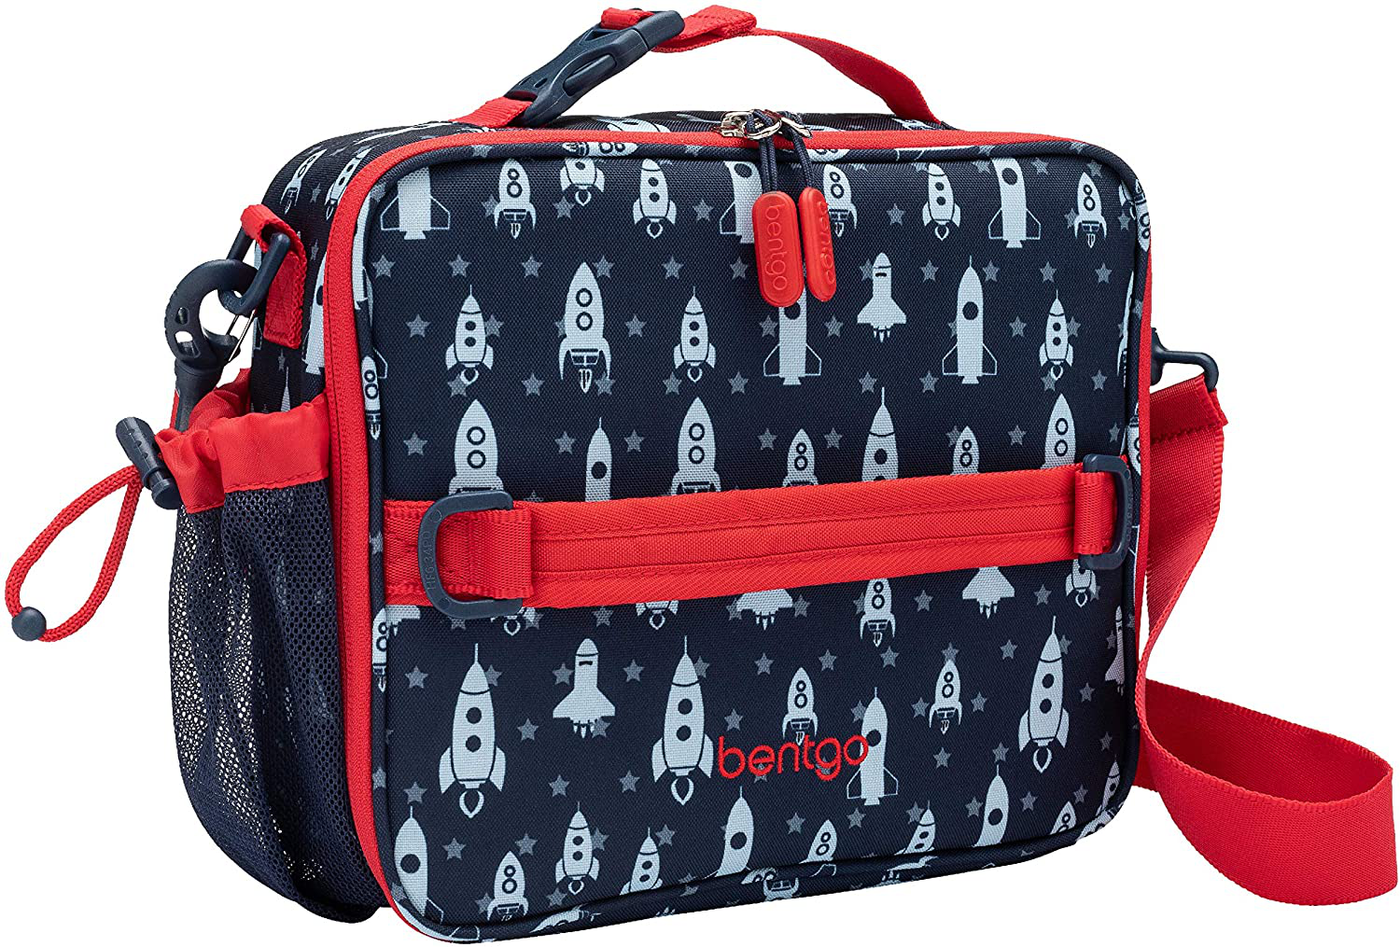 Bentgo Kids Prints Lunch Bag - Double Insulated, Durable, Water-Resistant Fabric with Interior and Exterior Zippered Pockets and External Bottle Holder- Ideal for Children of All Ages (Rocket)